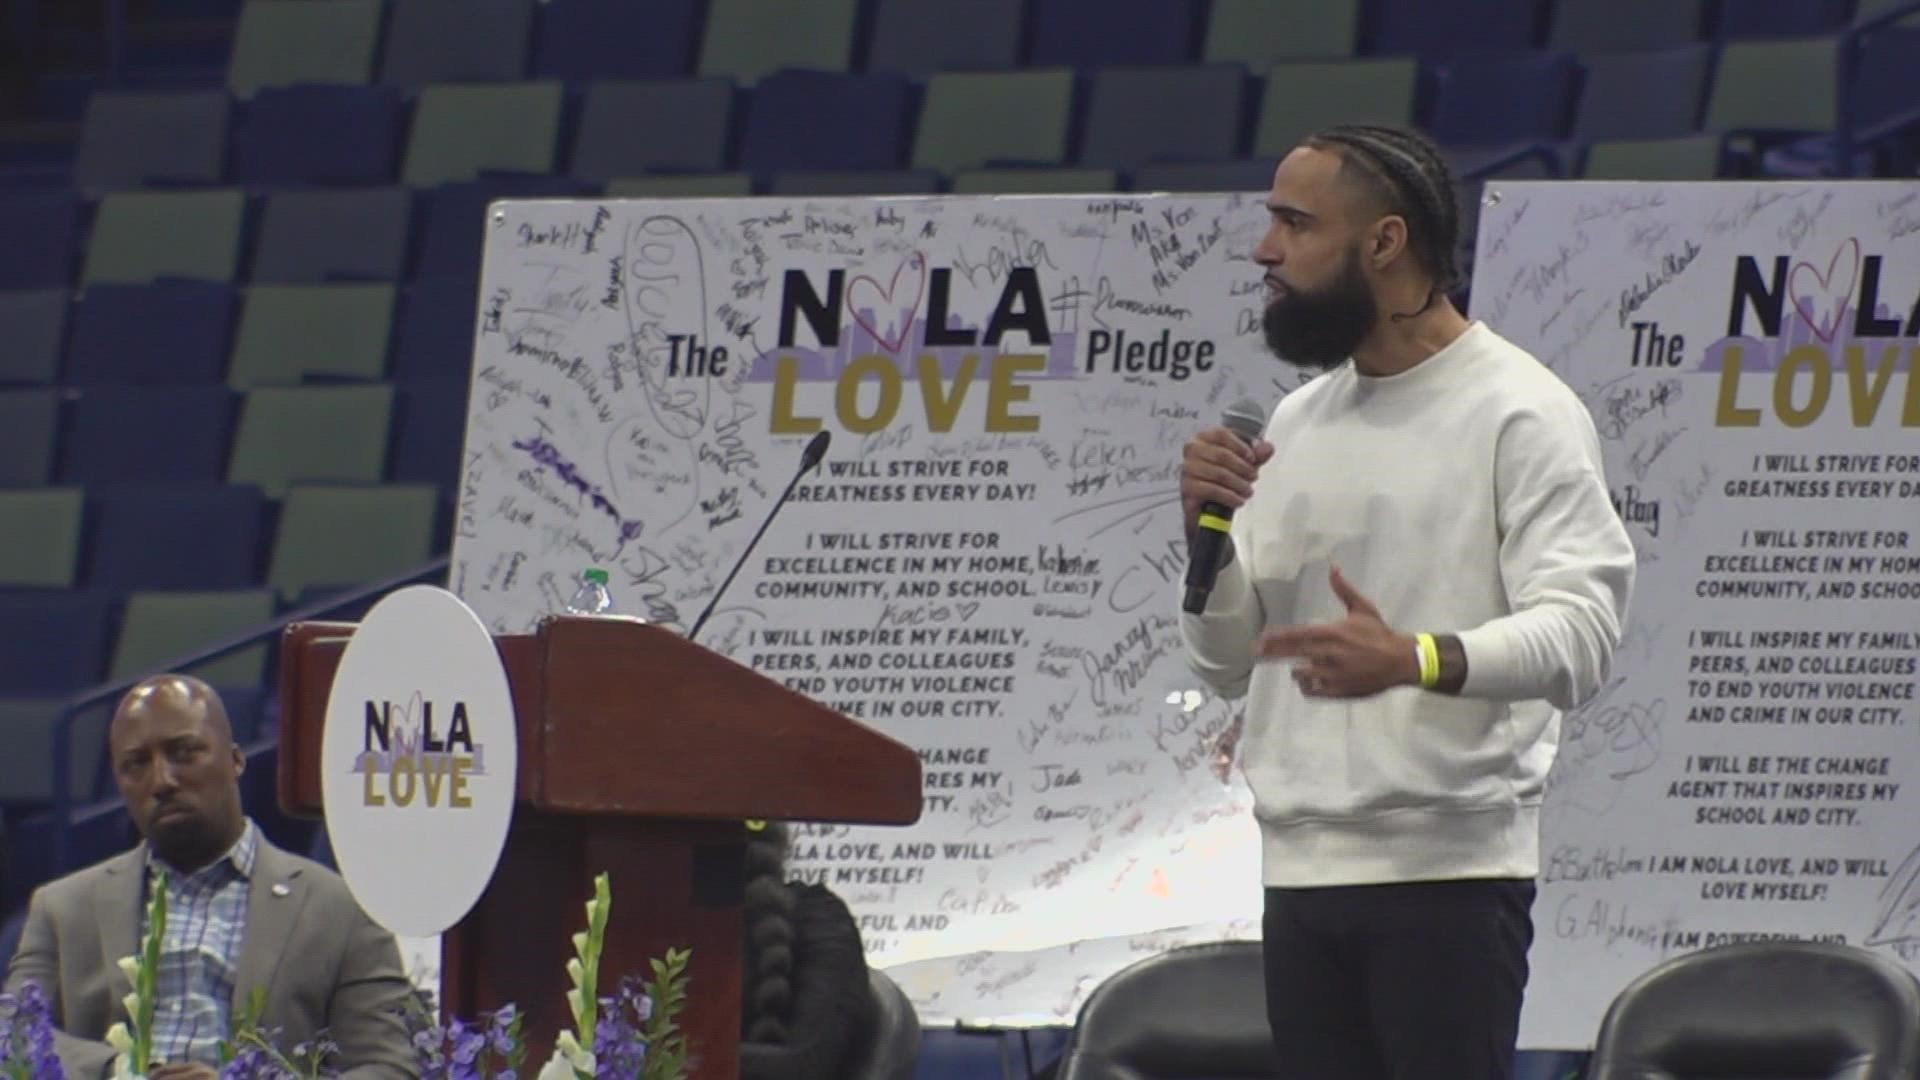 The event is meant to address and fix the culture of violence in New Orleans.